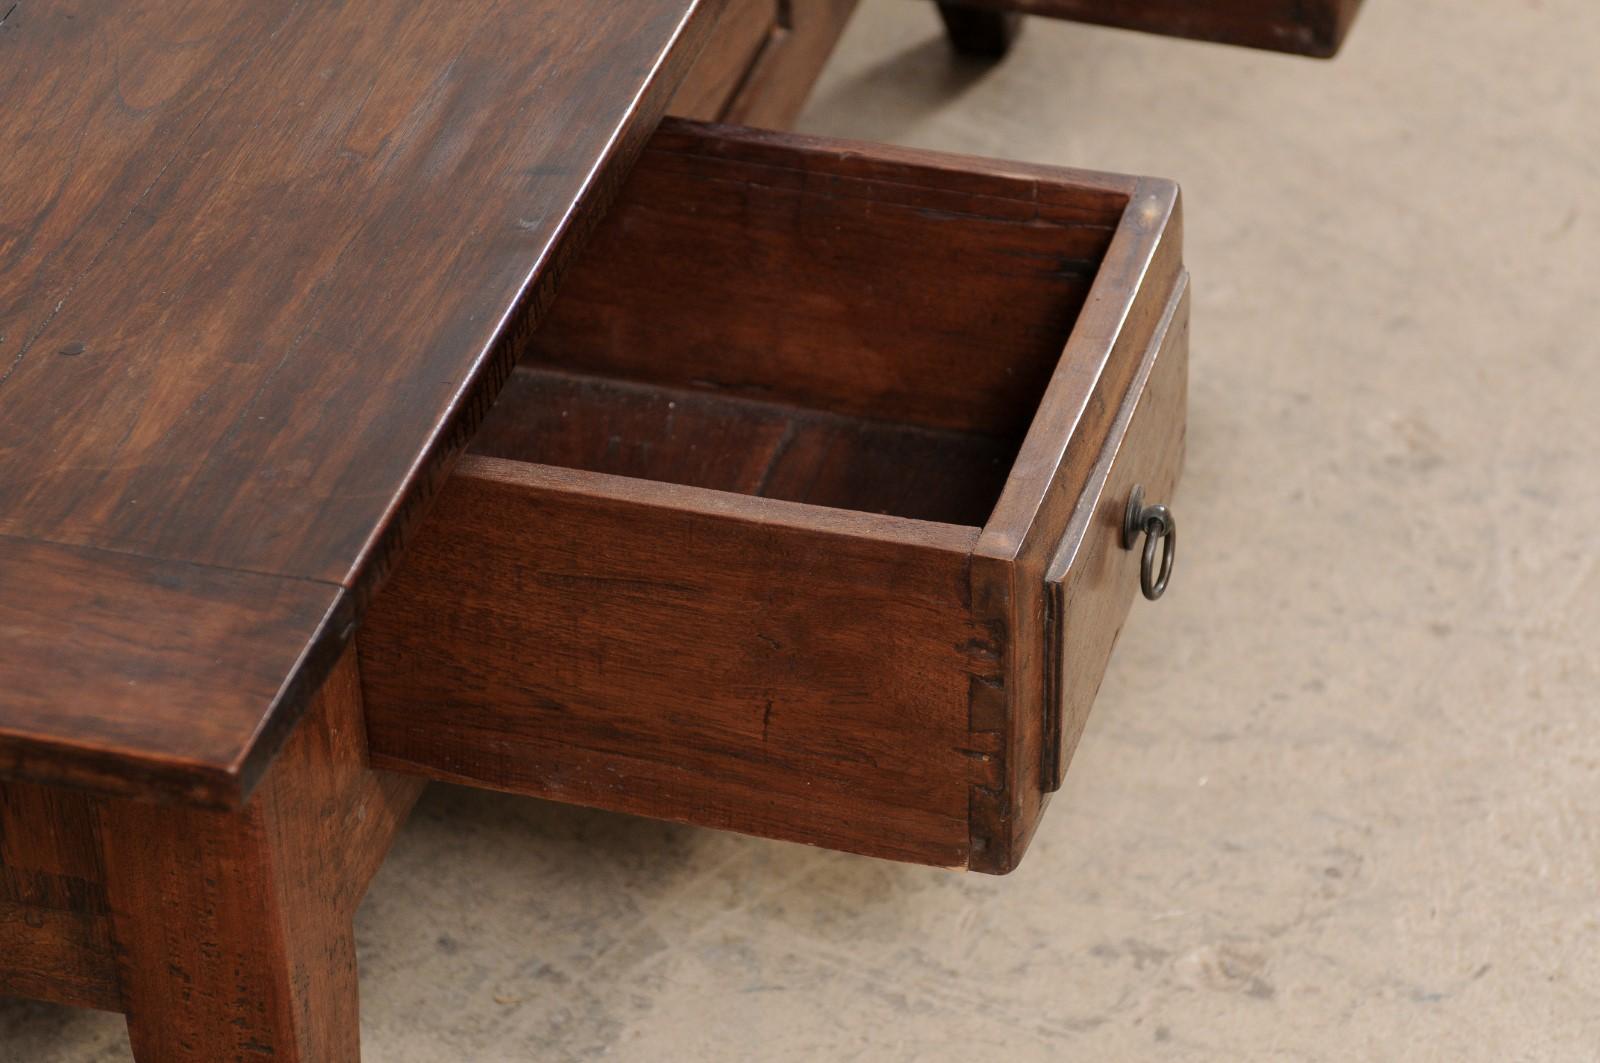 French Fruitwood Coffee Table in Rectangular-Shape w/Storage, Early 20th Century For Sale 1